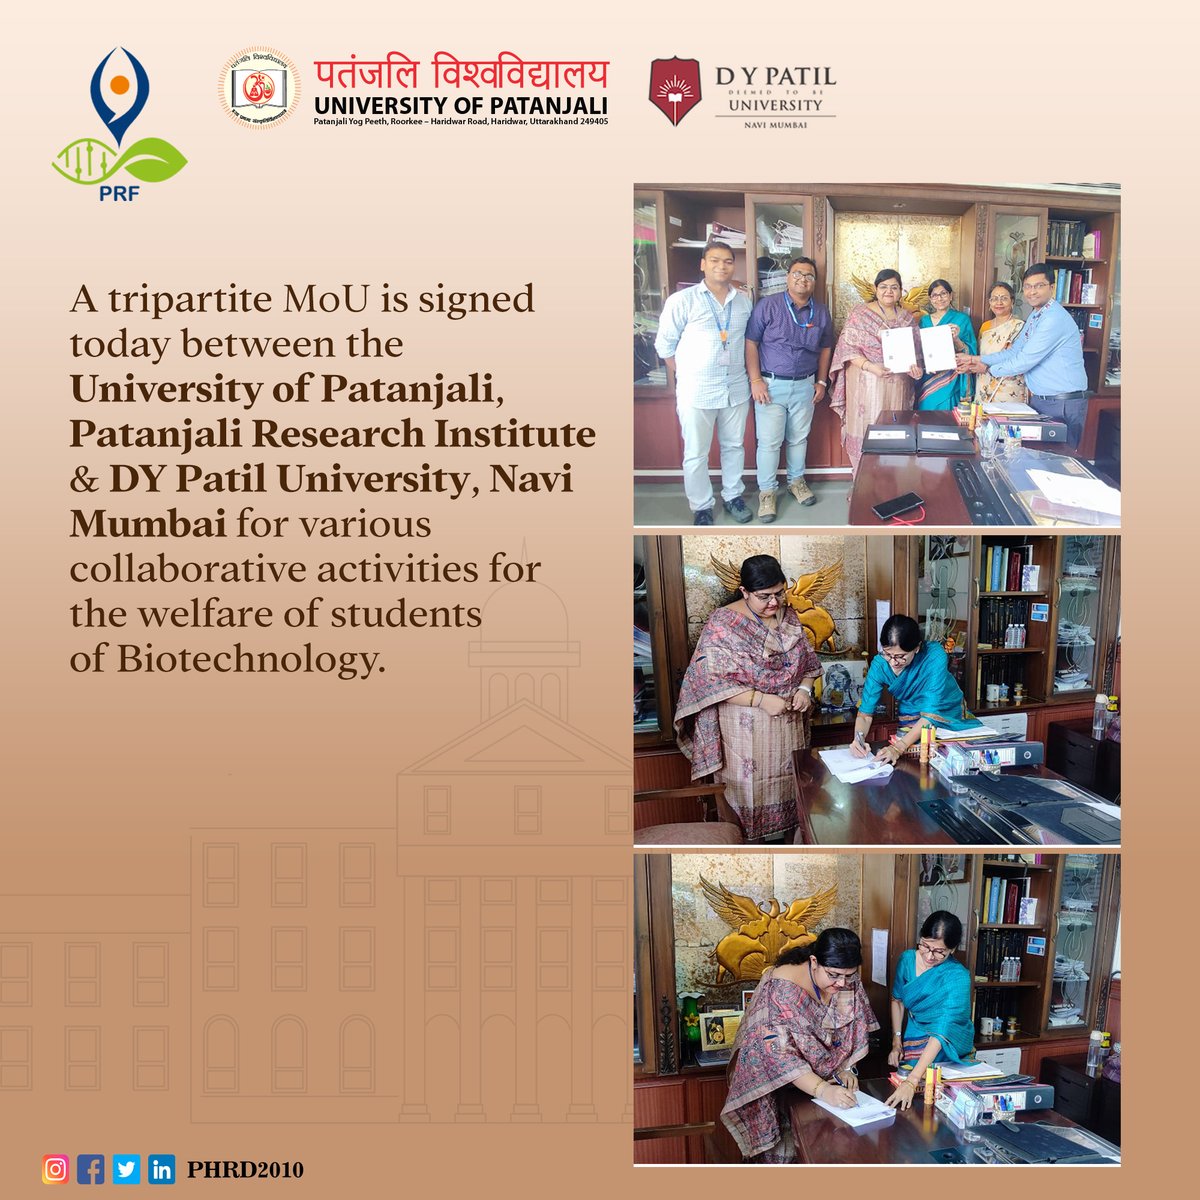 A tripartite MoU is signed today between the University of Patanjali, Patanjali research institute and DY Patil University, Navi Mumbai for various collaborative activities for the welfare of students of biotechnology.
#mou #universityofpatanjali #MoUsigned #dypatilcollege